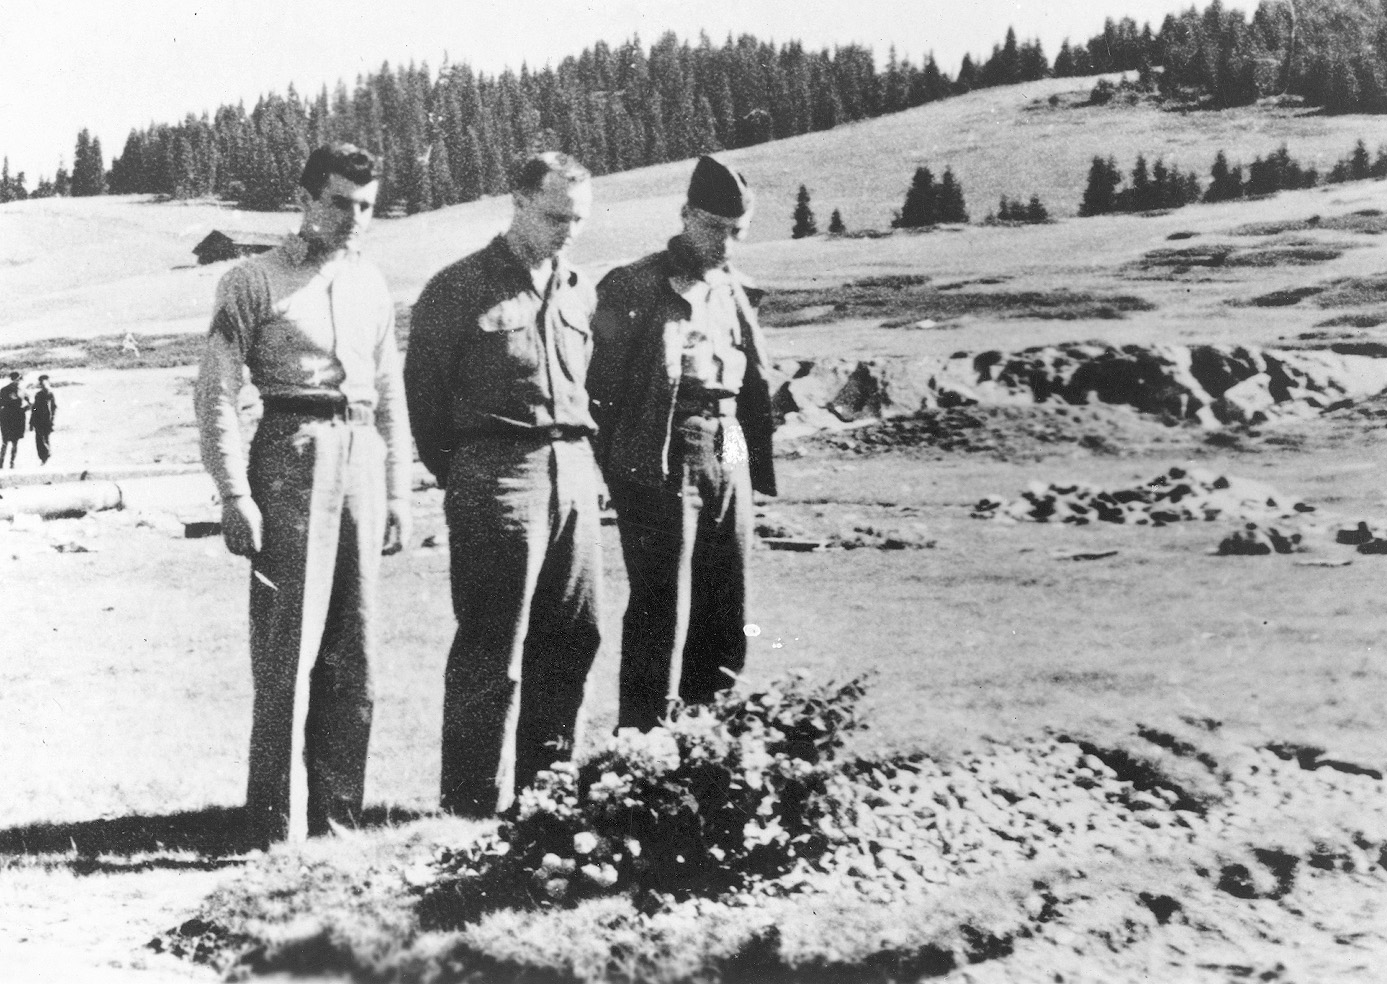 Marines (left to right) John P. Bodnar, Frederick J. Brunner, and Jack R. Risler stand at the grave of comrade Charles Perry, August 2, 1944.